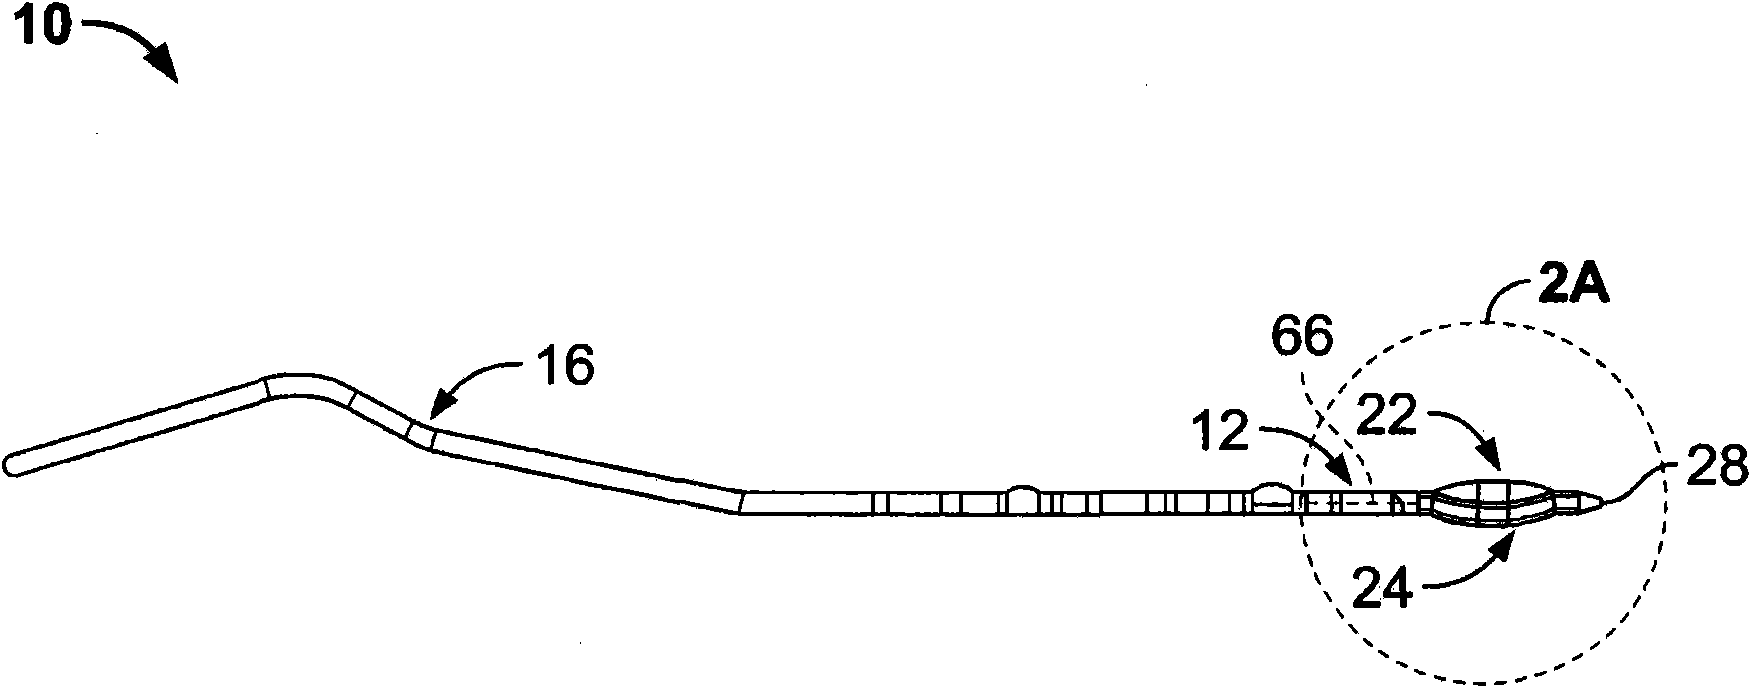 Electrical connector having improved electrical characteristics